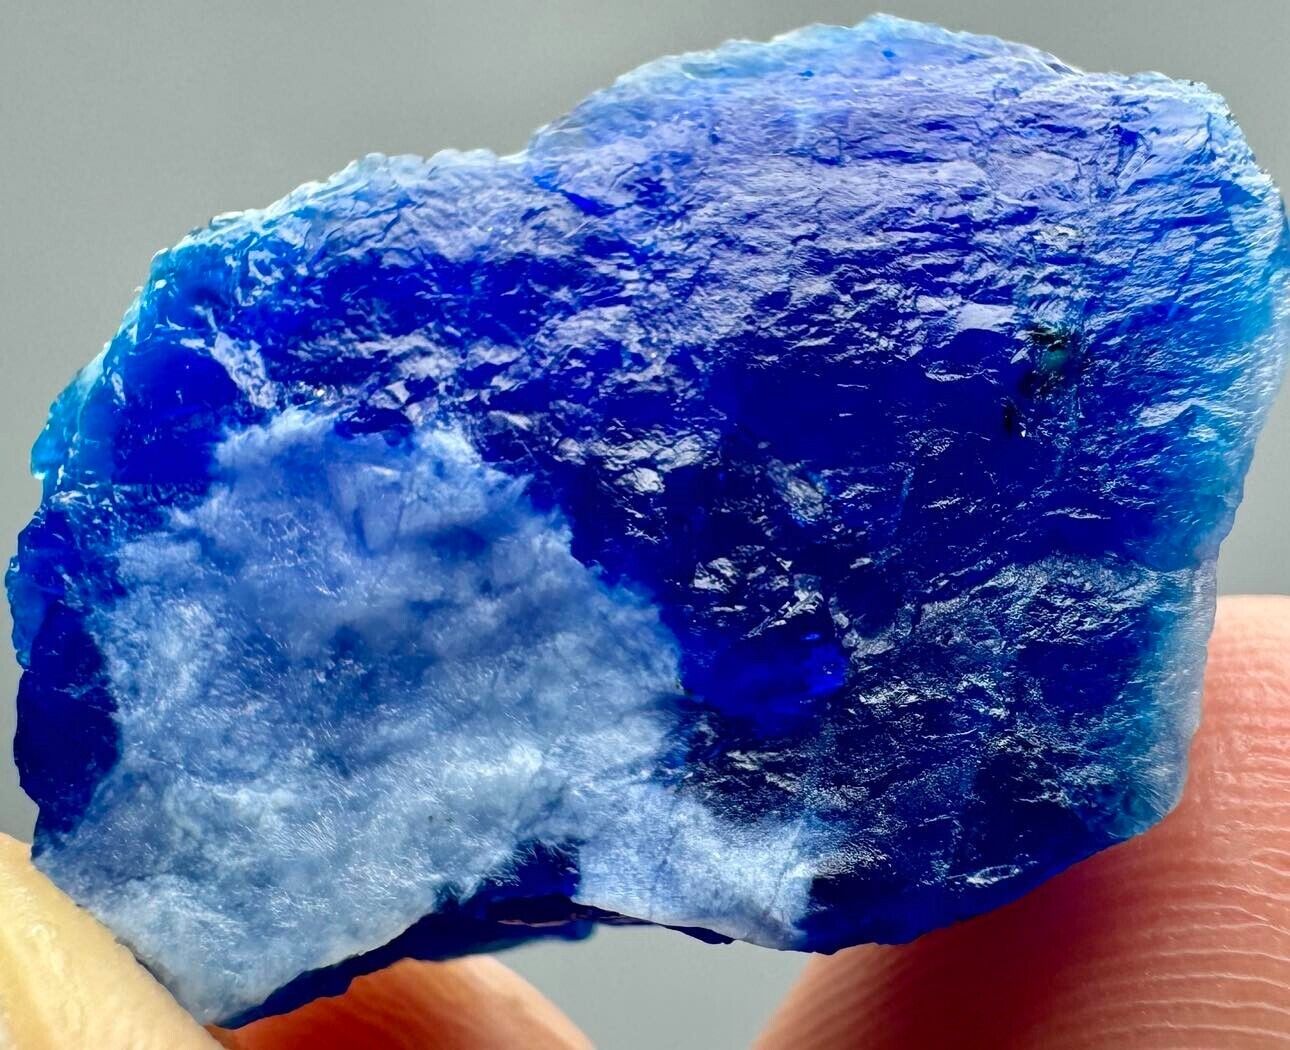 31 Carat UNUSUAL Fluorescent Top Blue Hauyne Crystal Piece From @Afg